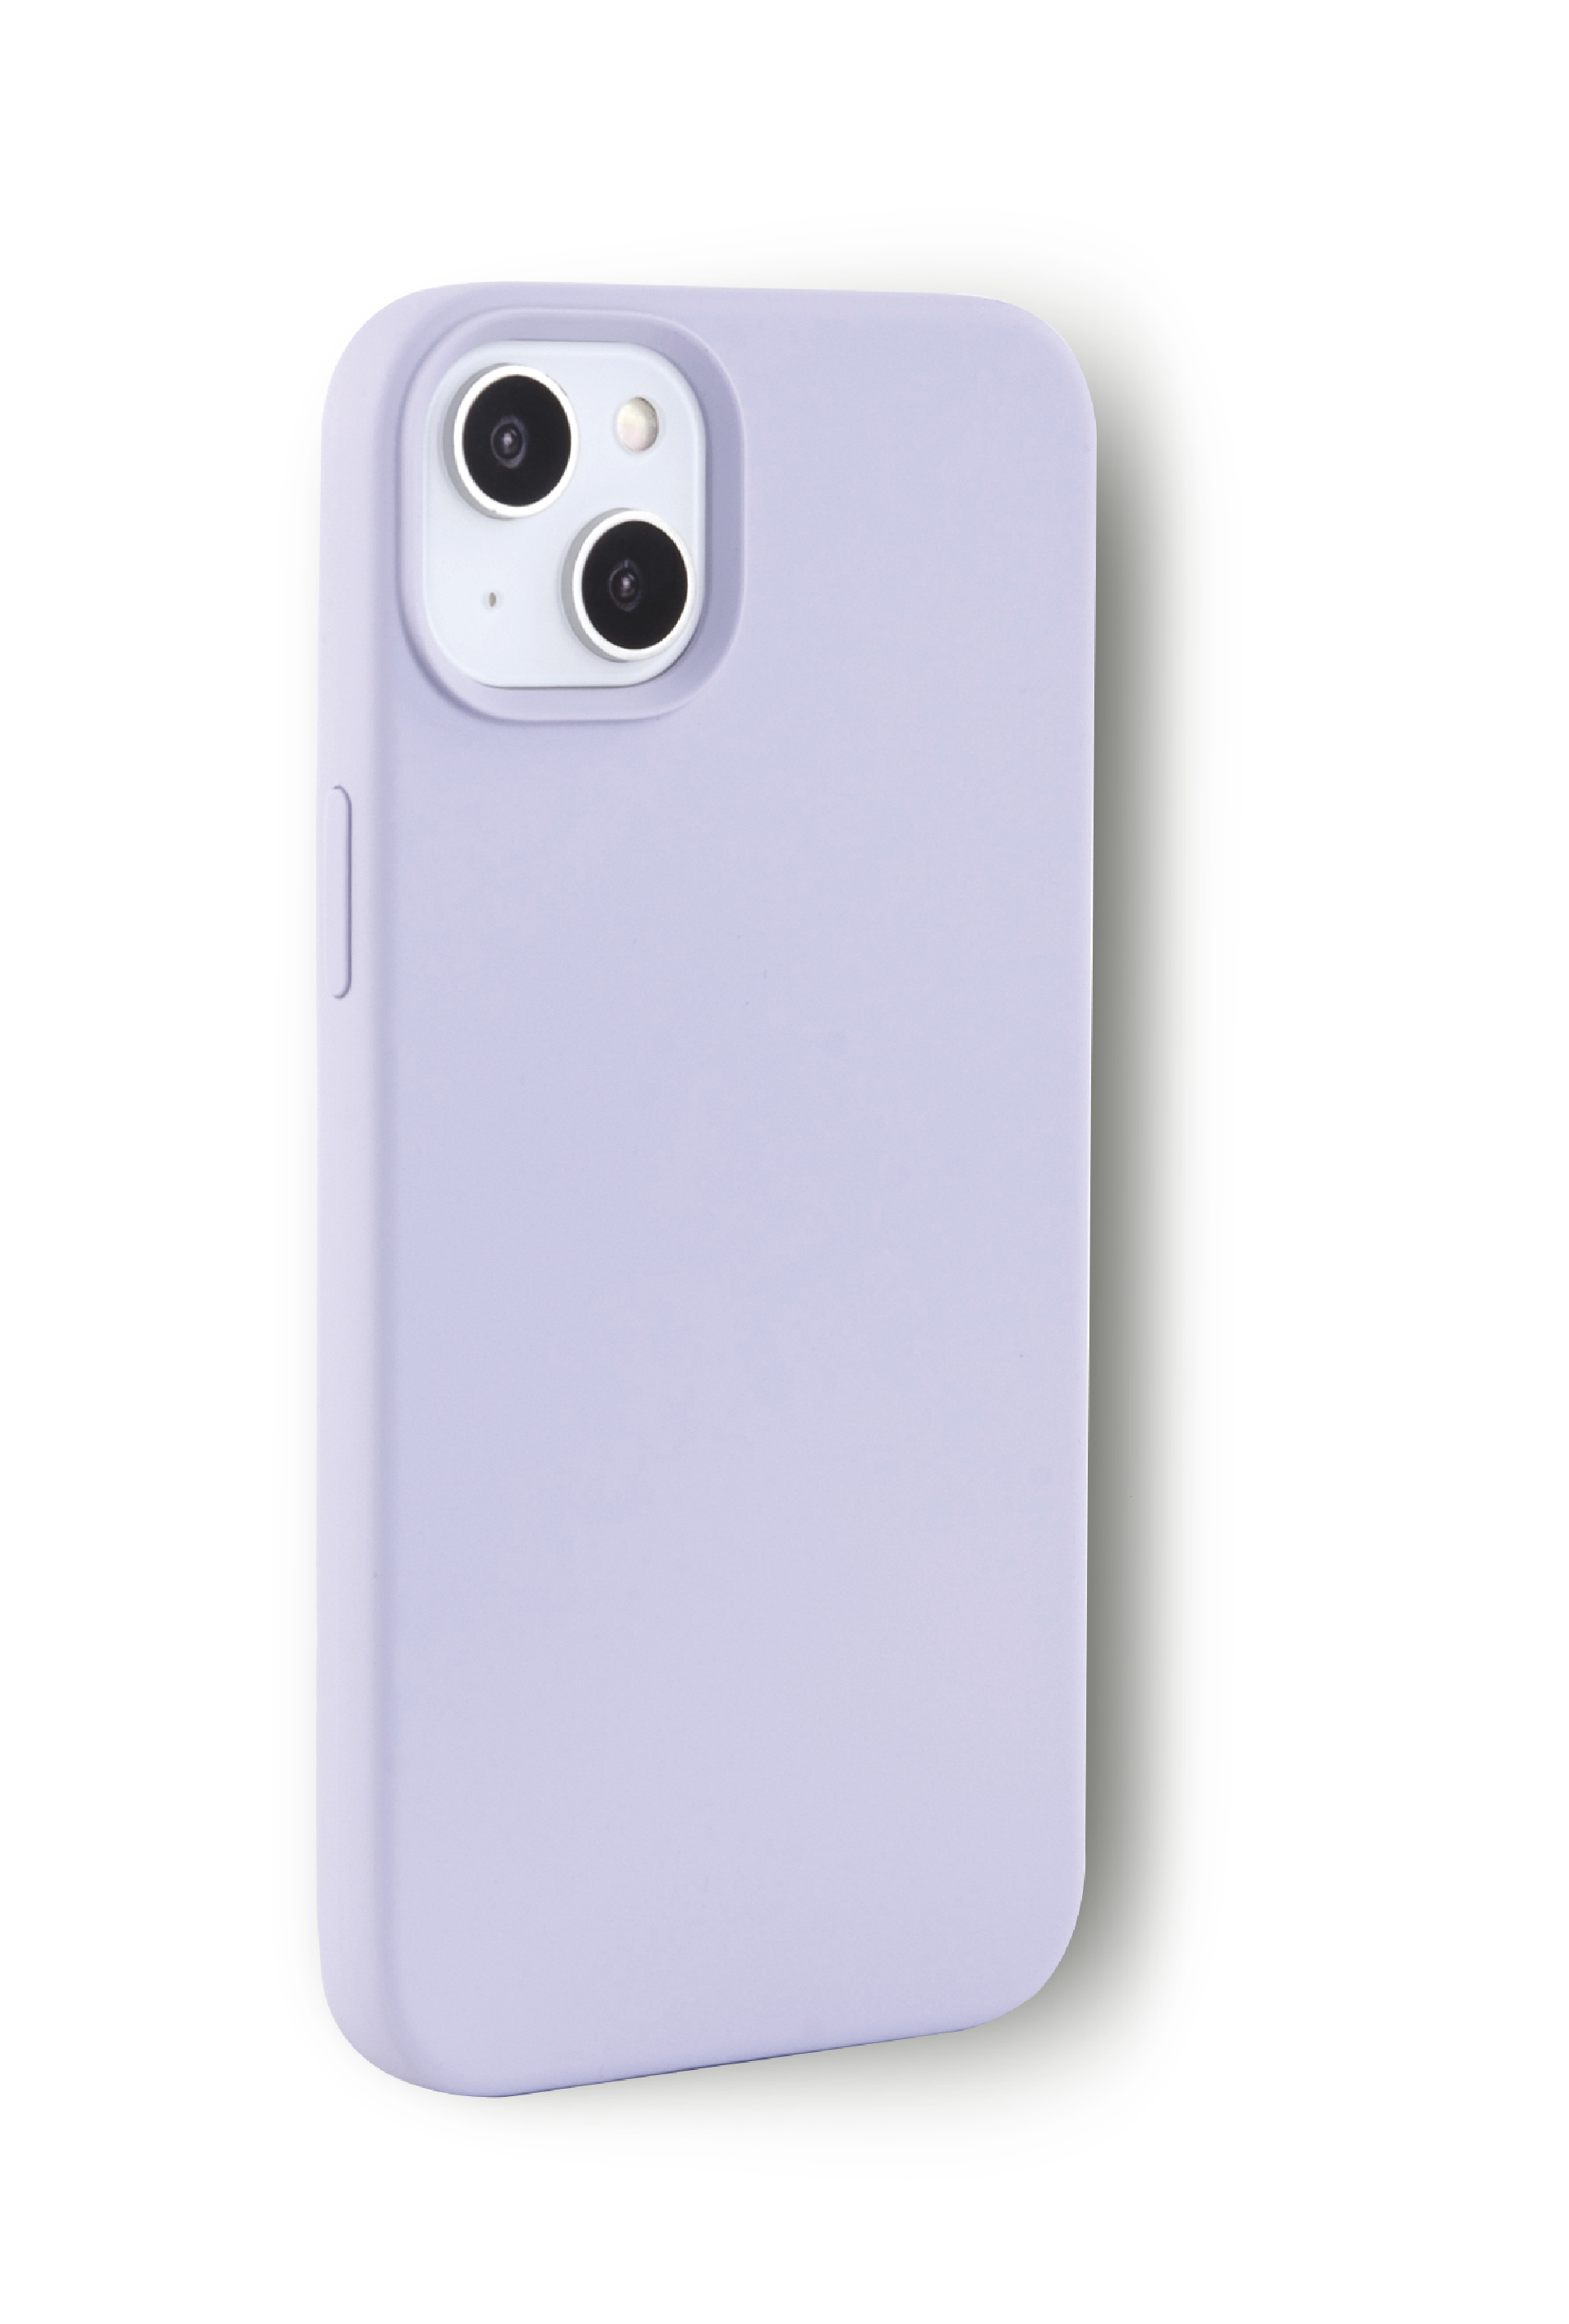 Plus, iPhone ISY ISC-2320, Violett Apple, 14 Backcover,